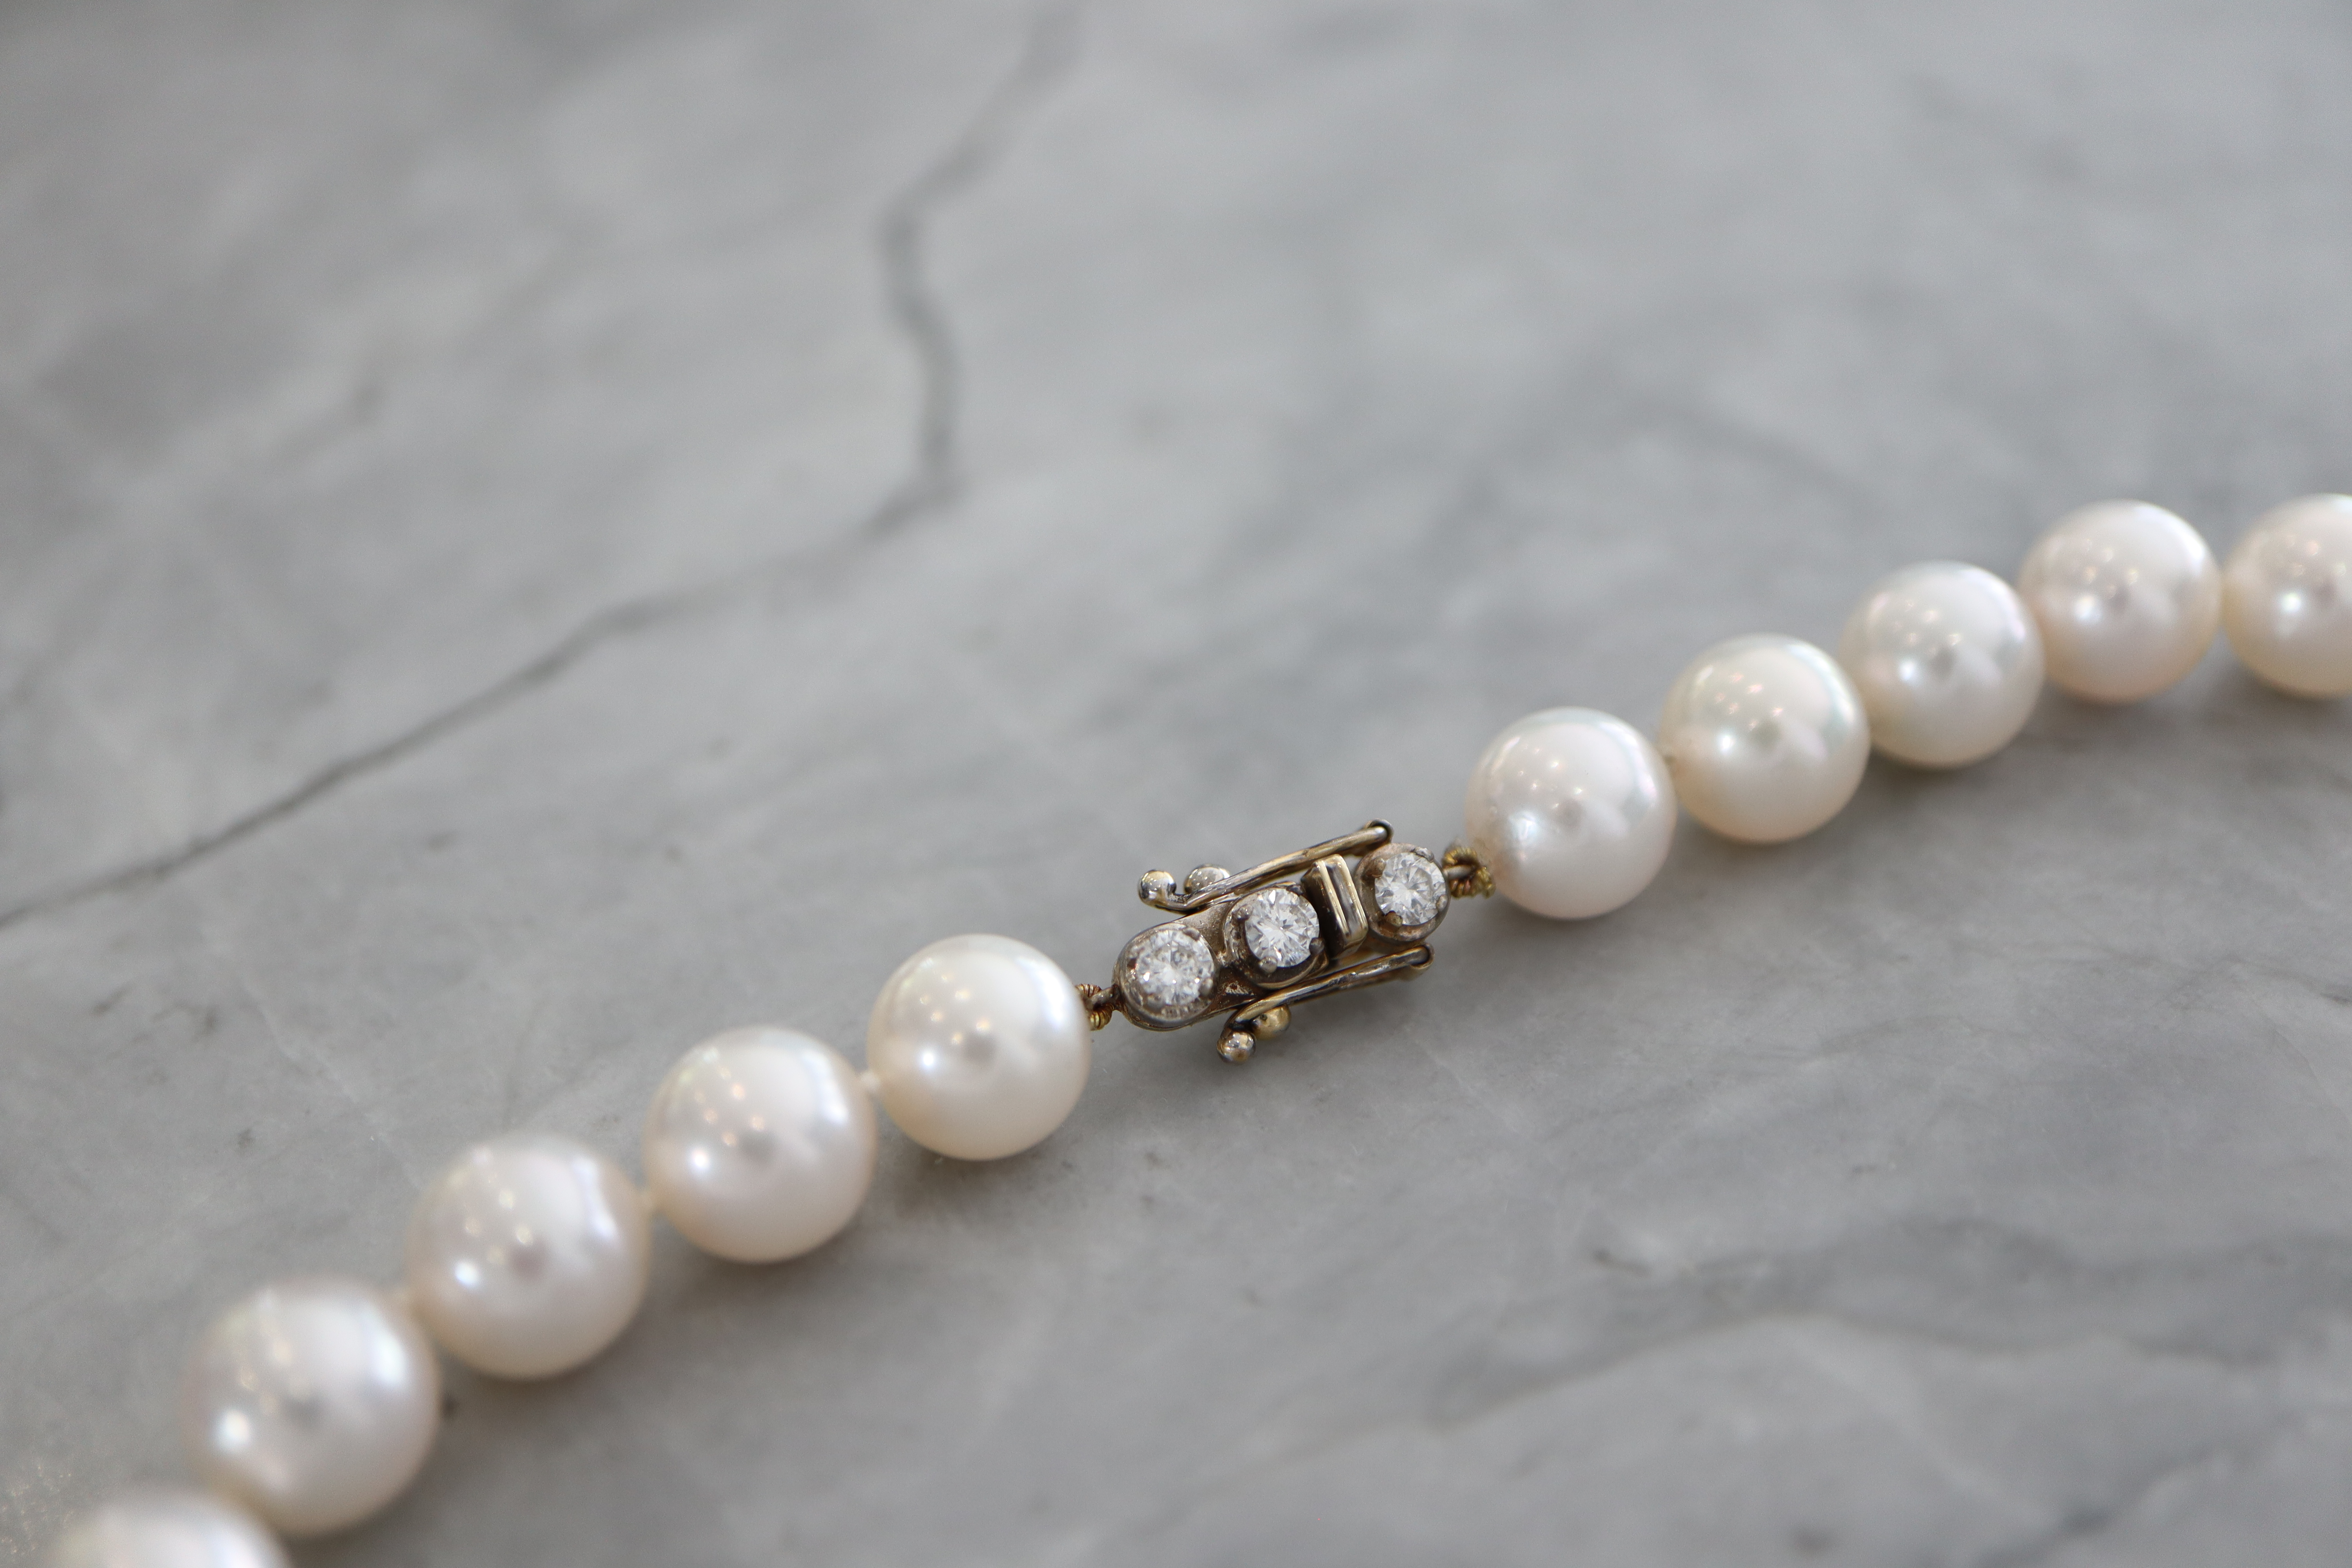 14K WHITE GOLLD & DIAMOND CLASP - CULTURED PEARL NECKLACE - Image 3 of 5